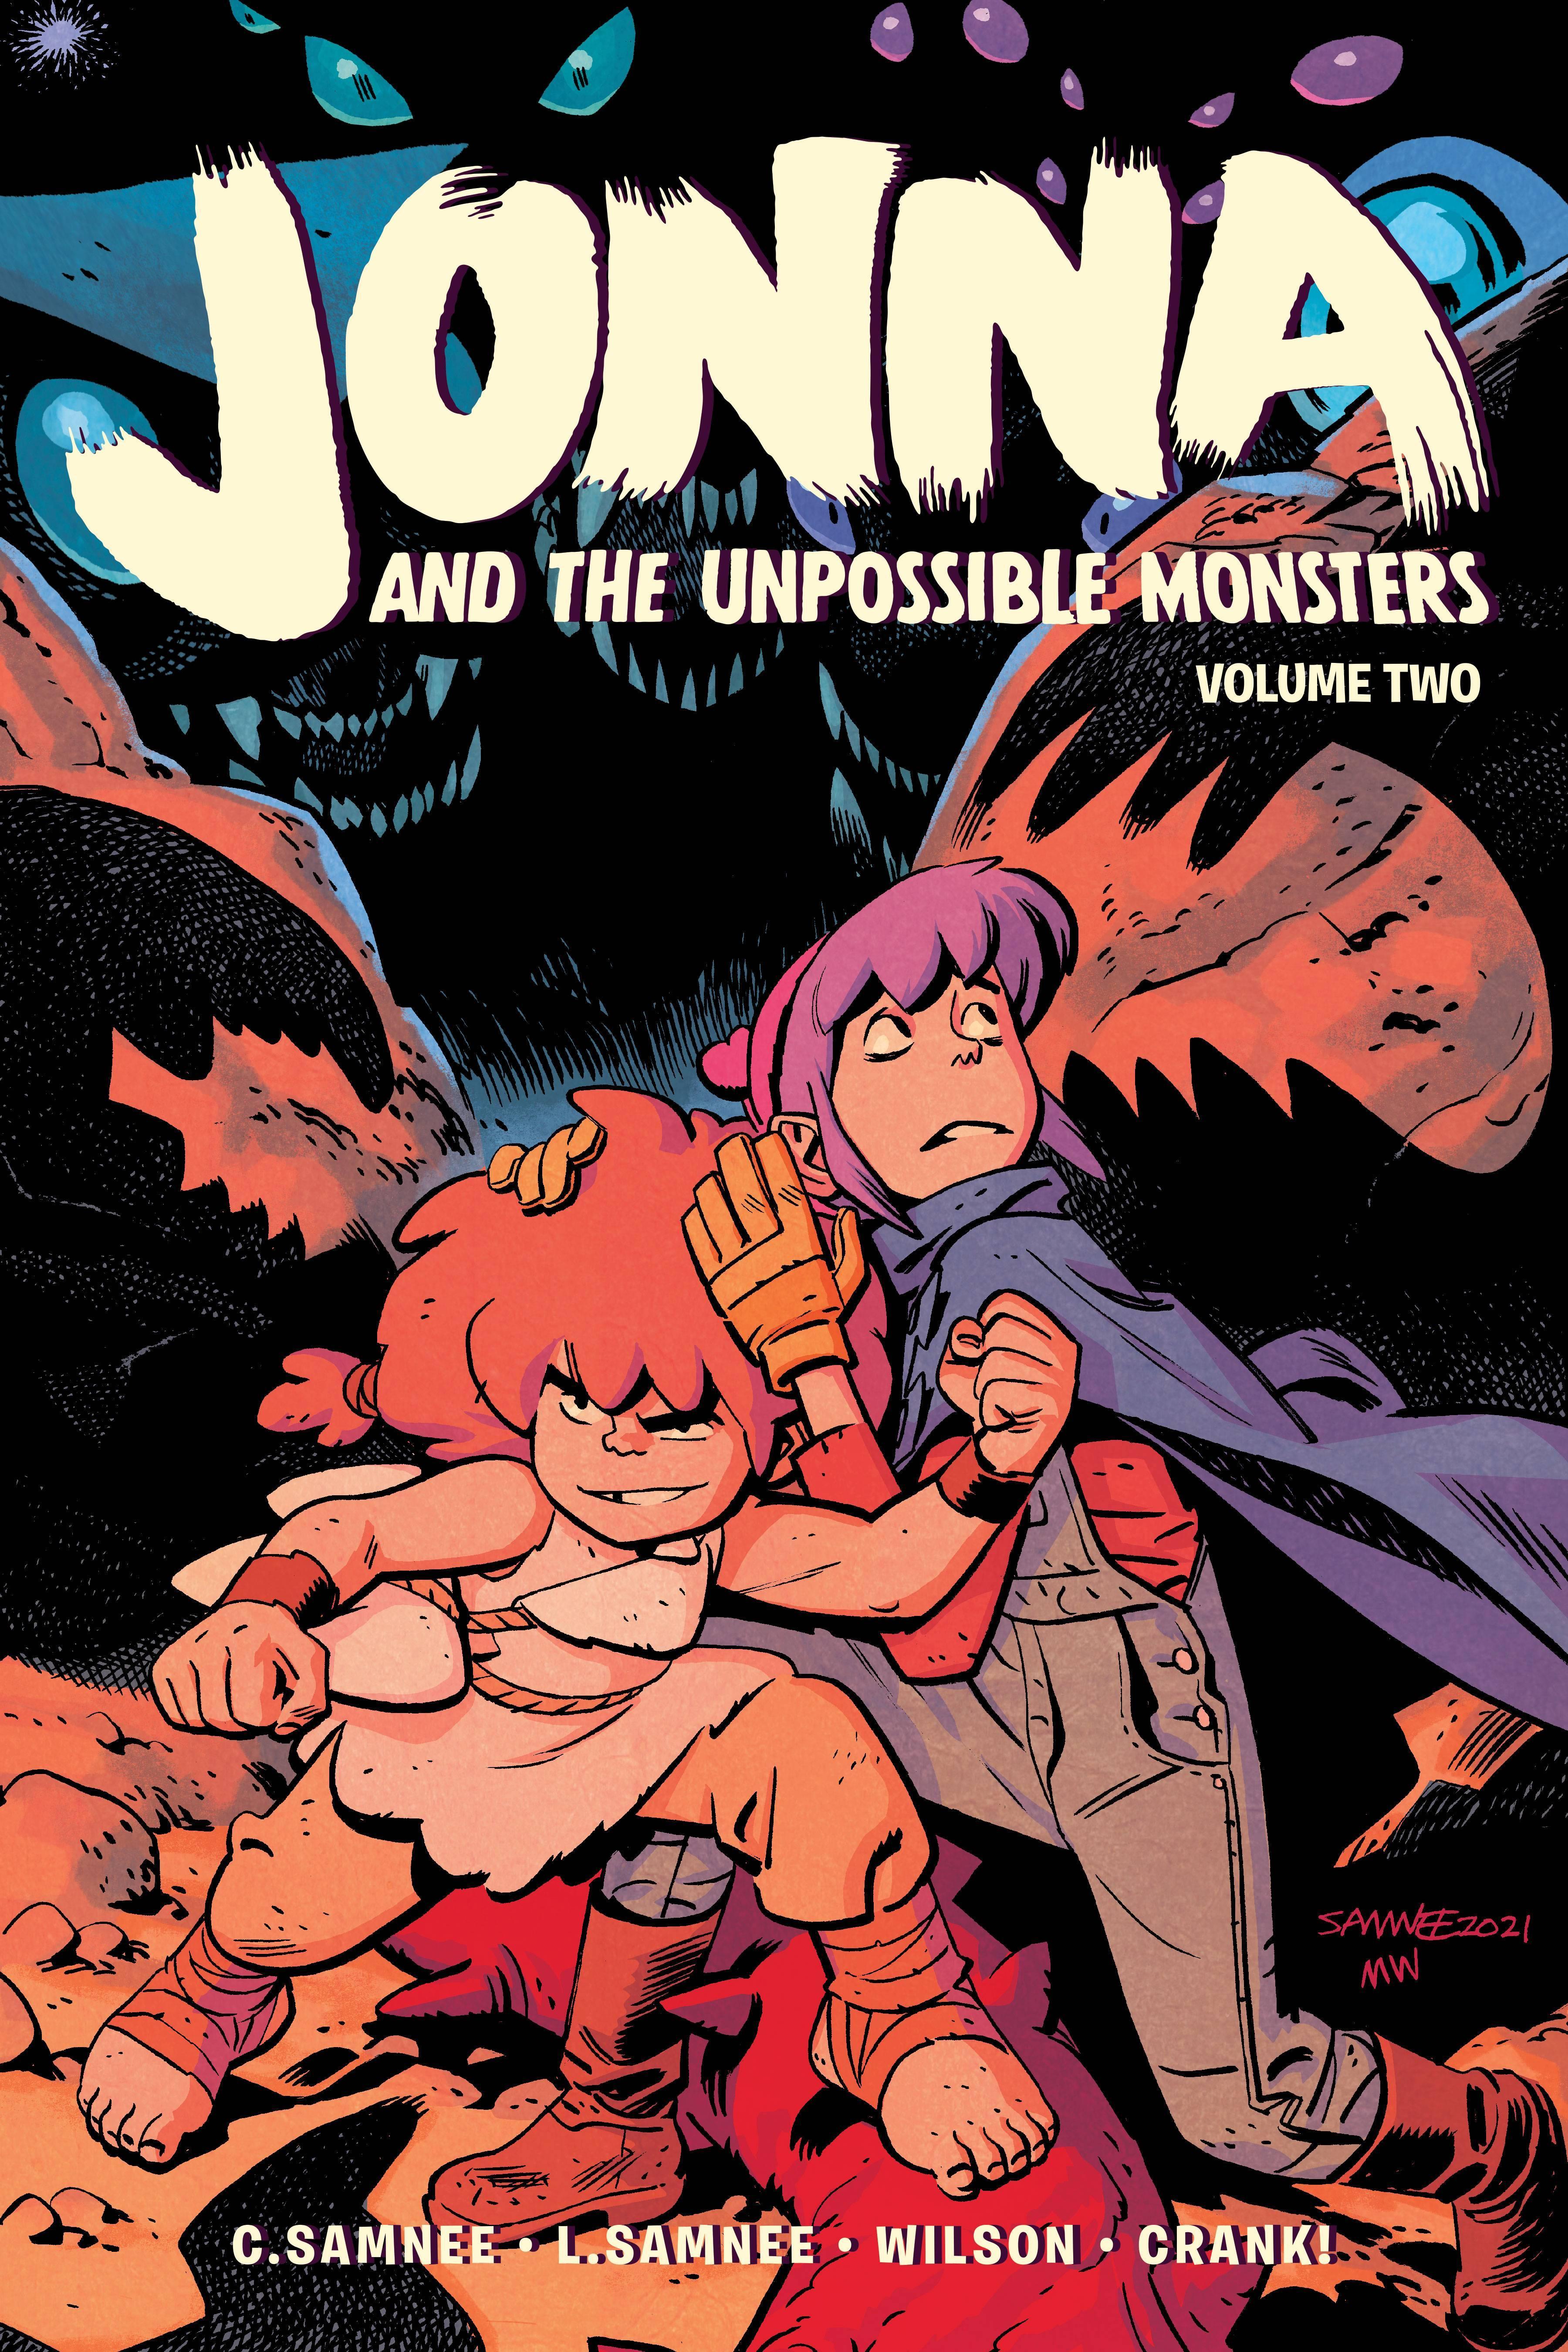 JONNA AND THE UNPOSSIBLE MONSTERS VOL 02 TP - Kings Comics